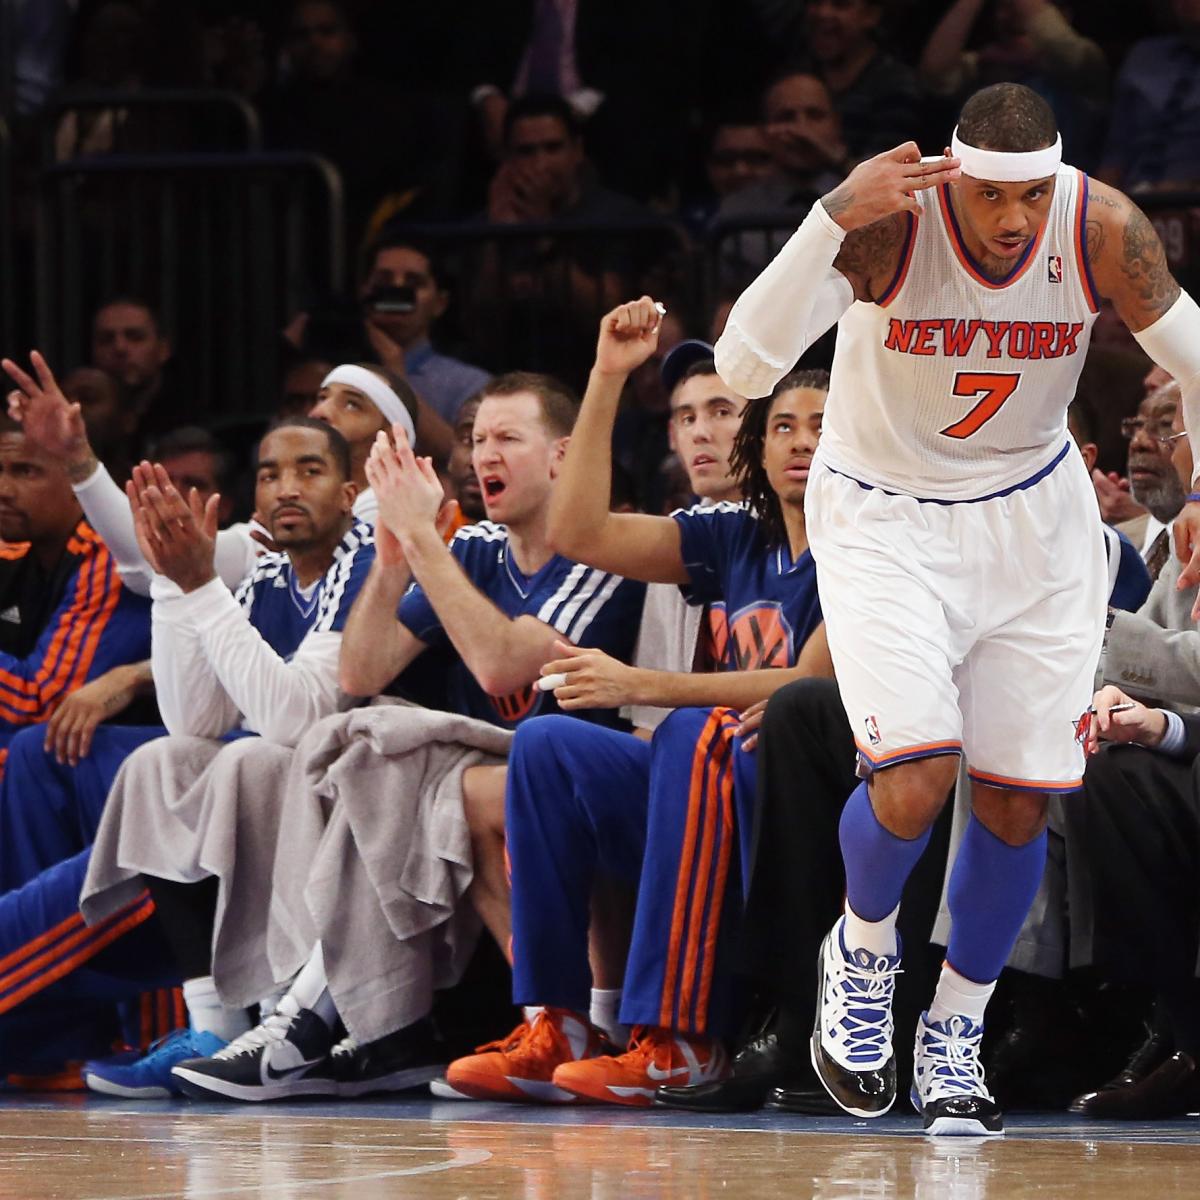 Memphis Grizzlies vs. New York Knicks Live Score, Results and Game